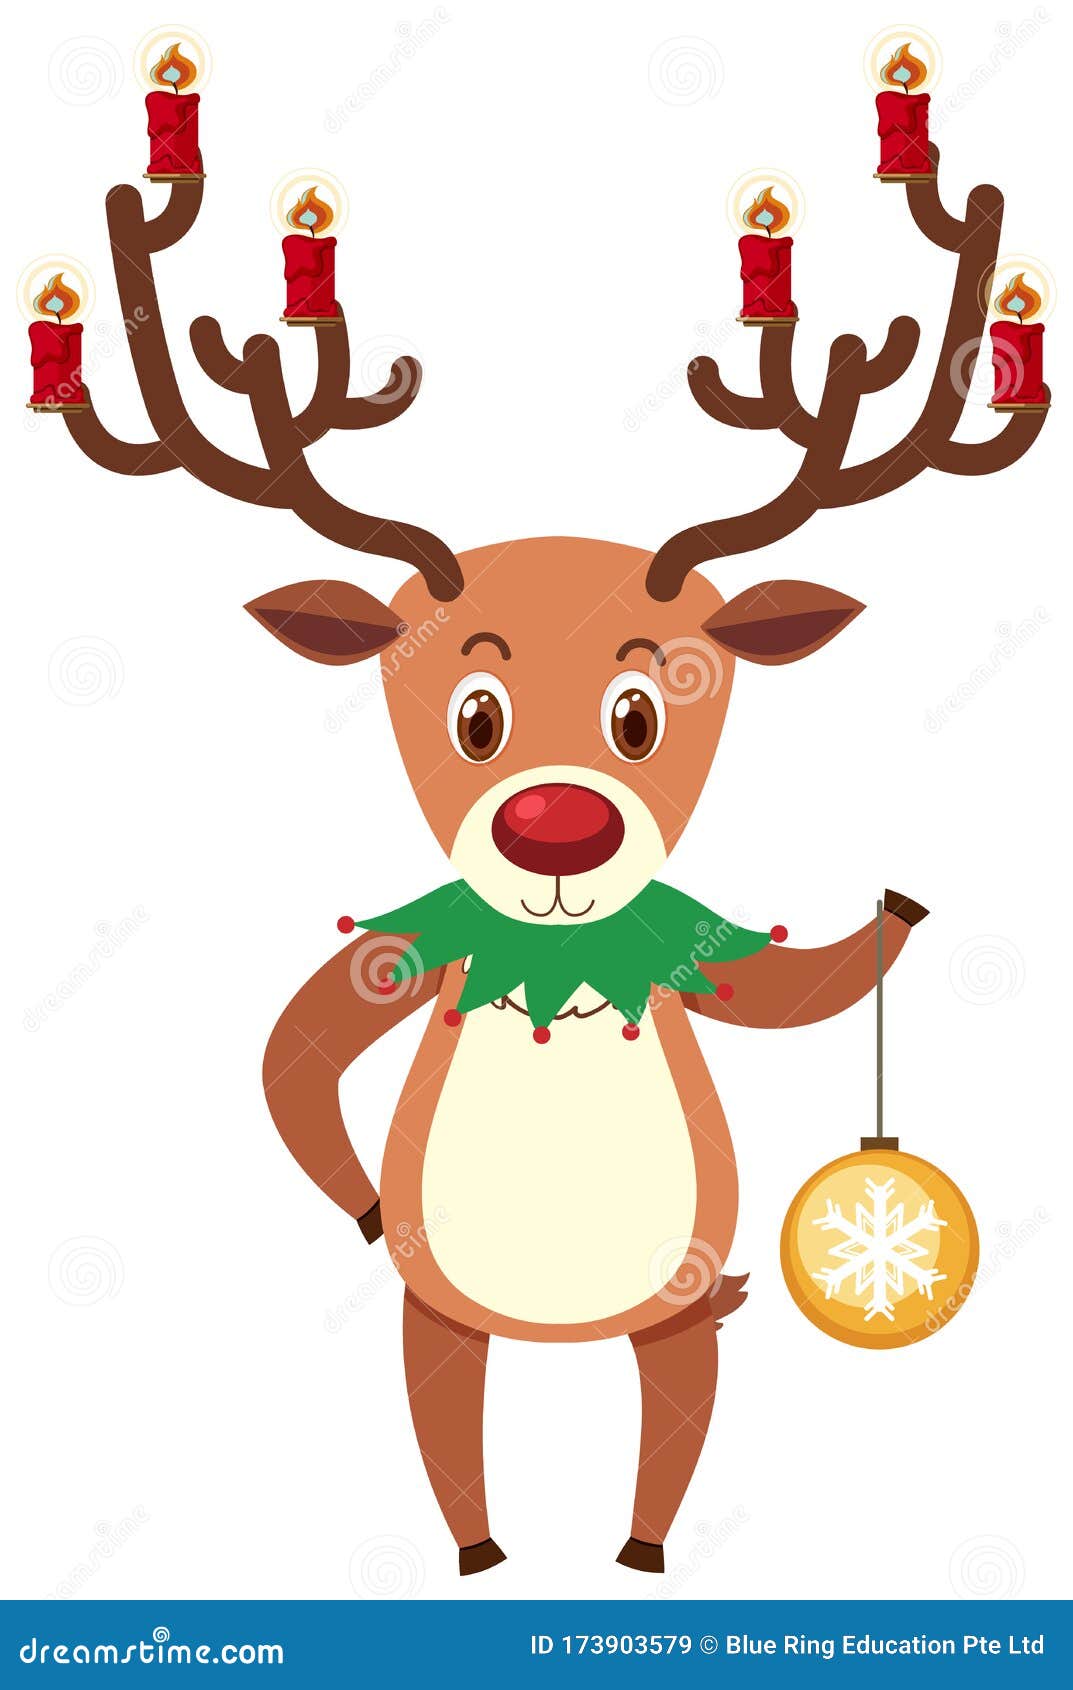 Single Character Of Reindeer And Ornament On White